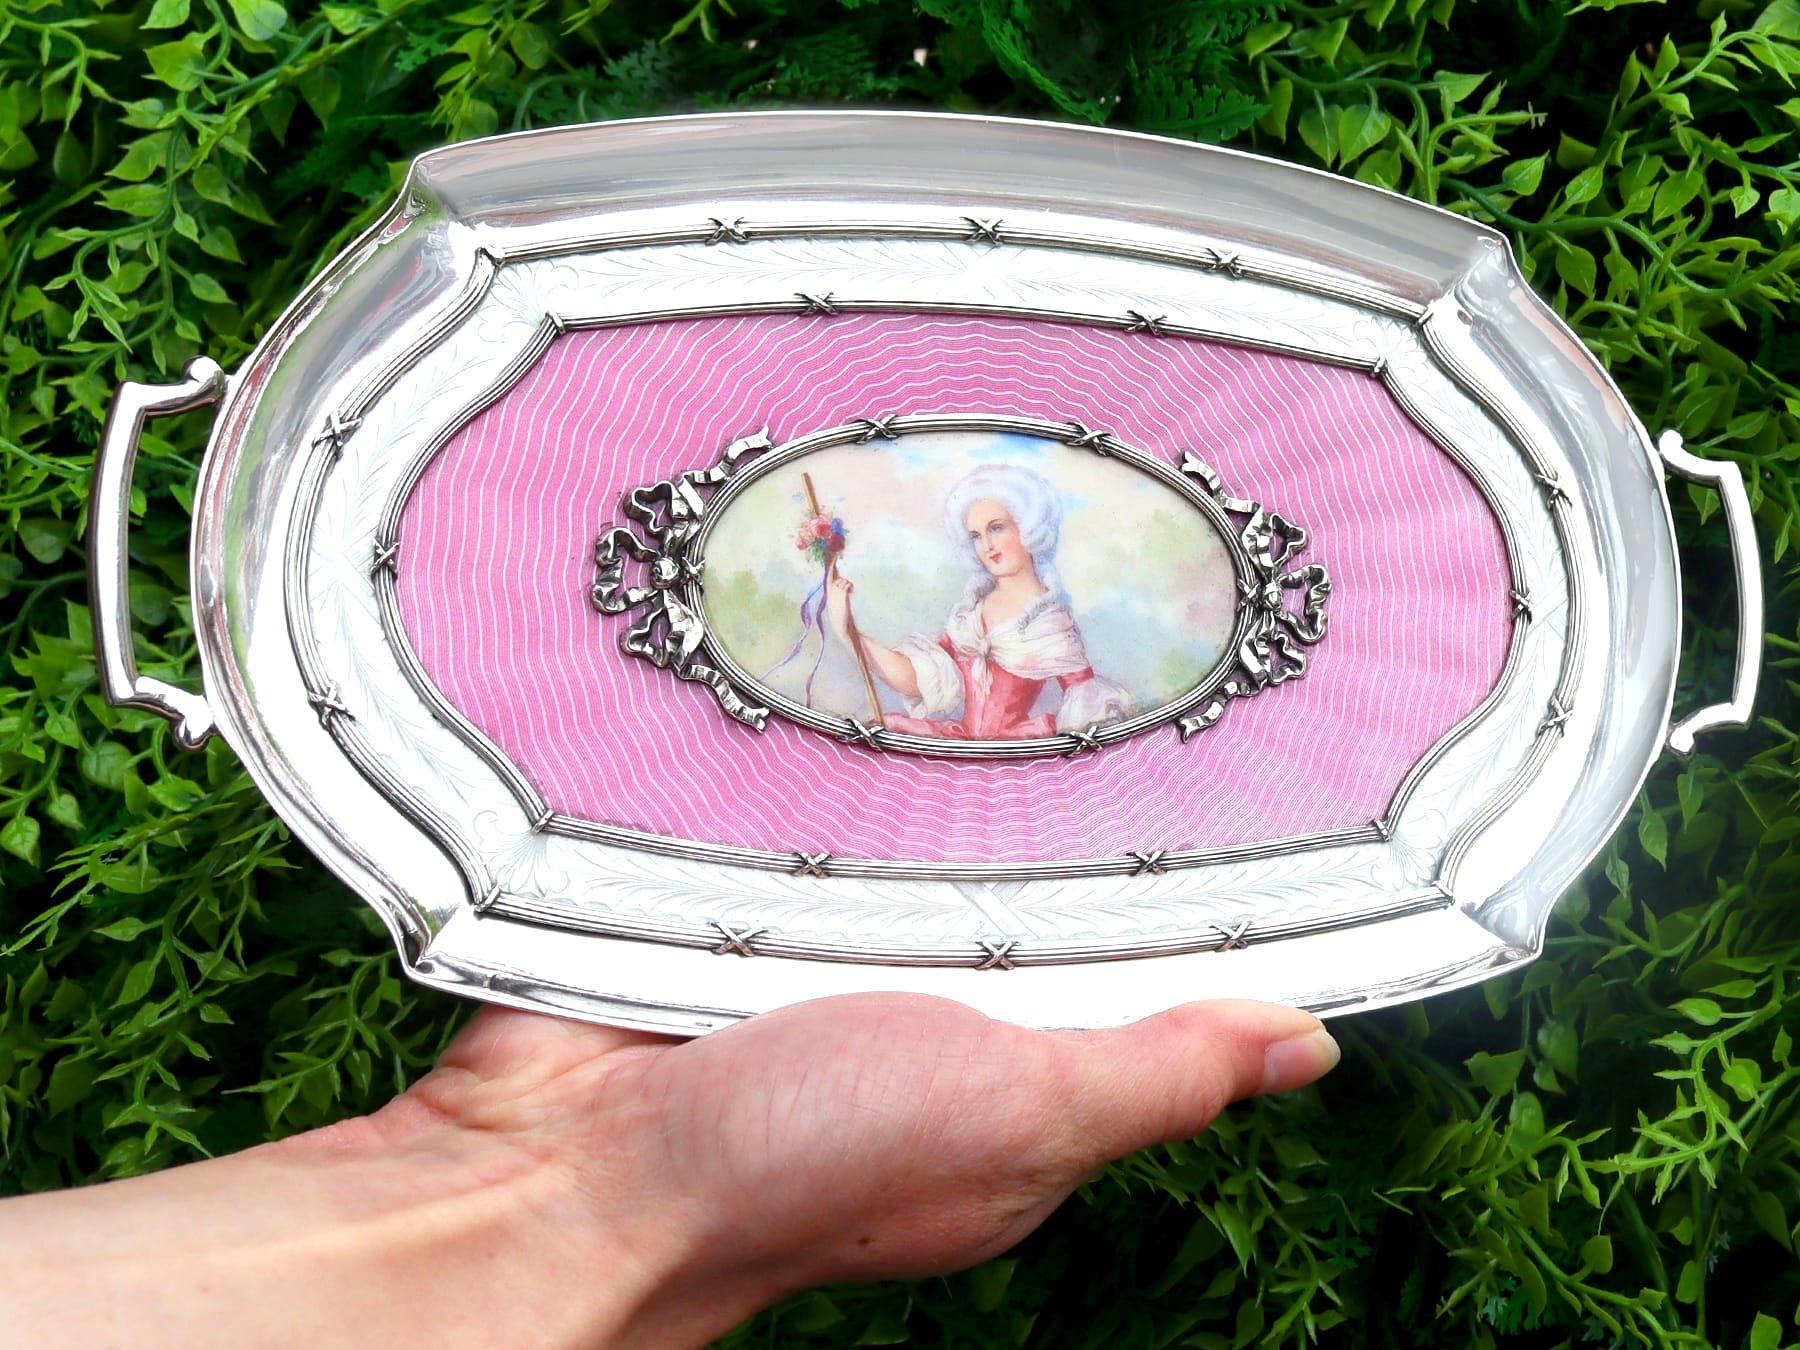 An exceptional, fine and impressive antique Austrian silver and enamel boudoir tray; an addition to our continental silver collection.

This exceptional antique Austrian silver boudoir tray has an oval shaped form.

The surface of this antique tray